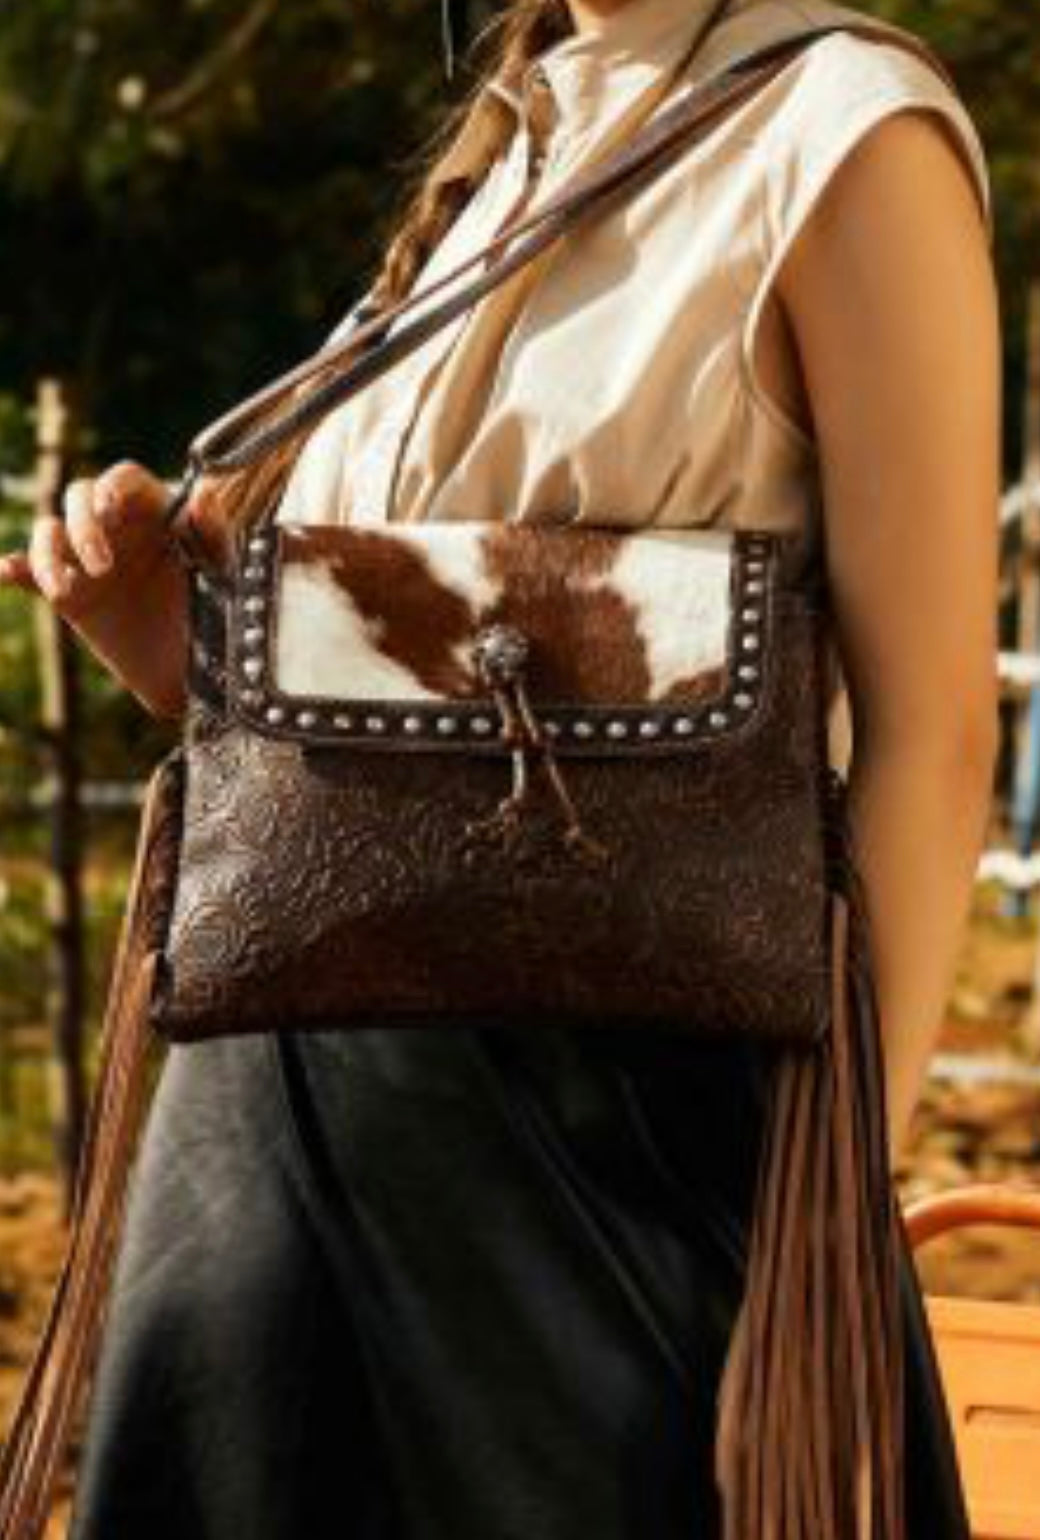 Myra Bag Carved blossoms Leather & Hair On Bag crossbody S-3339